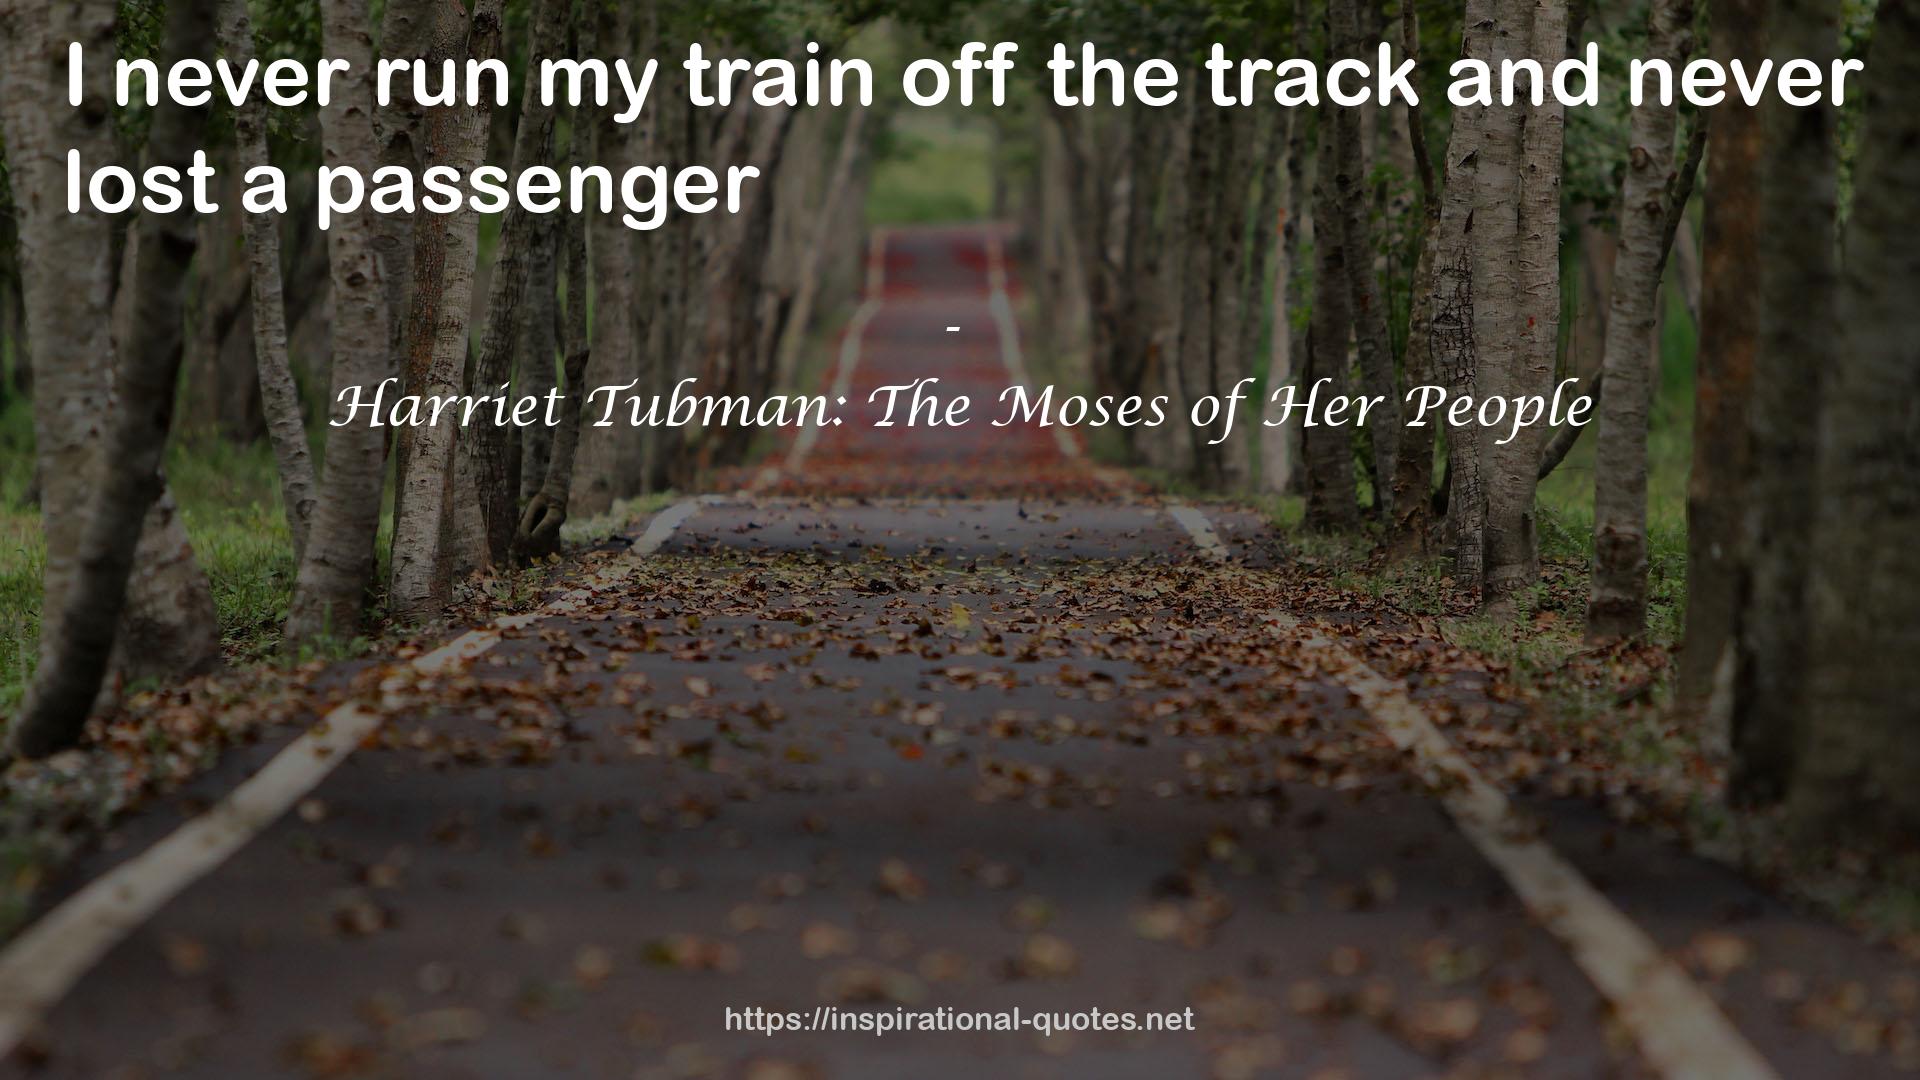 Harriet Tubman: The Moses of Her People QUOTES